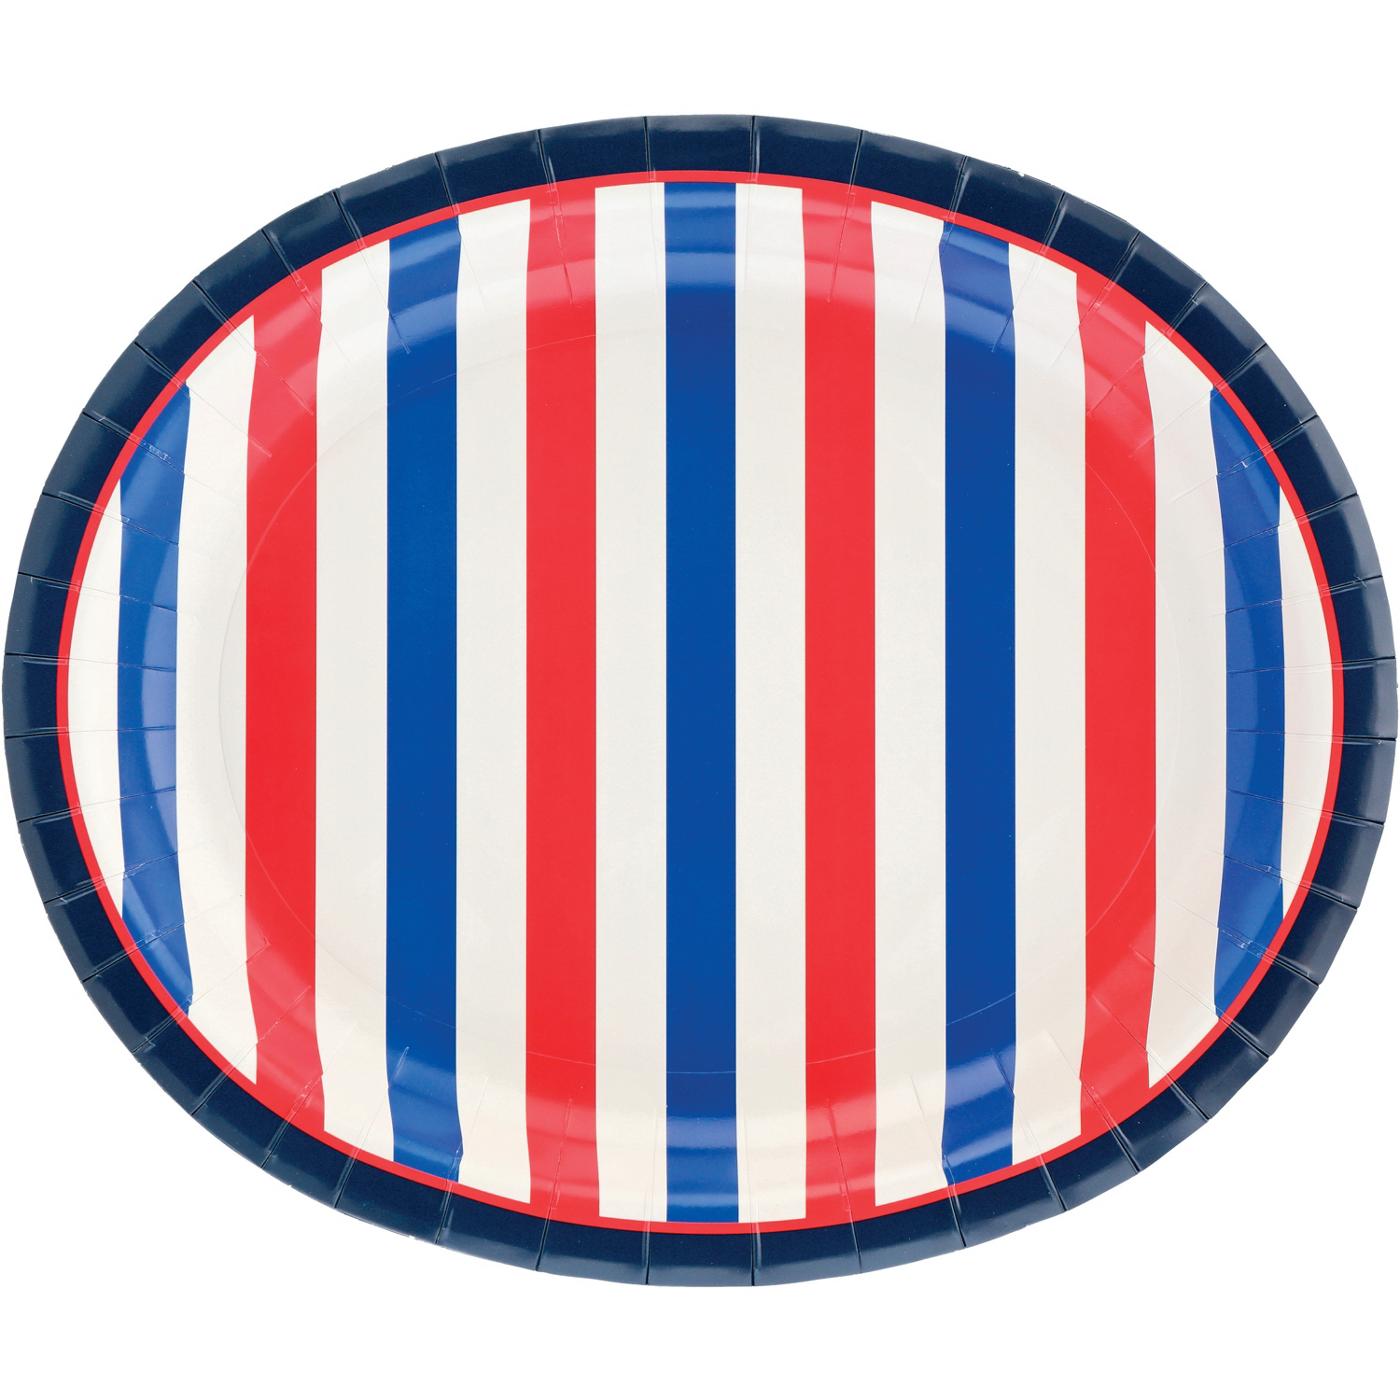 Destination Holiday Oval Patriotic Paper Plates; image 1 of 2